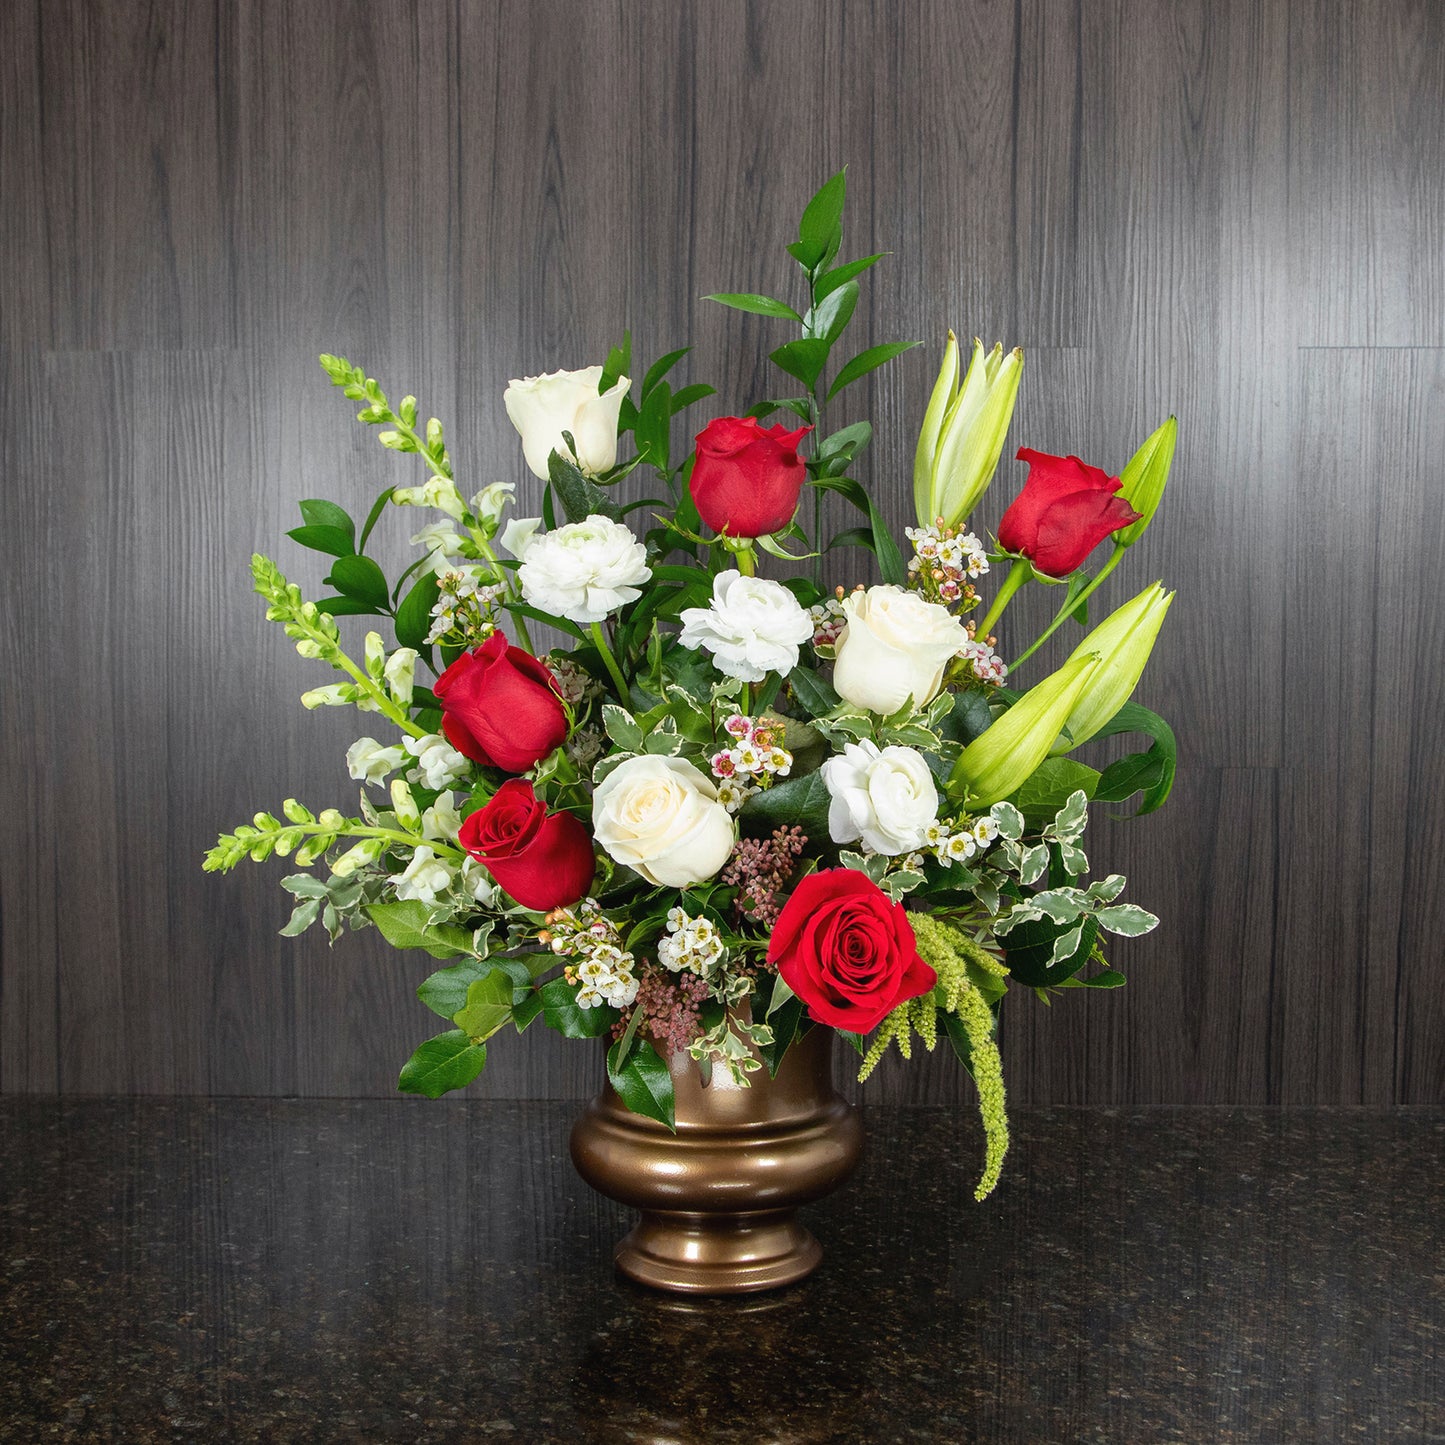 a tabletop funeral spray with red and white flowers in a copper plastic urn container